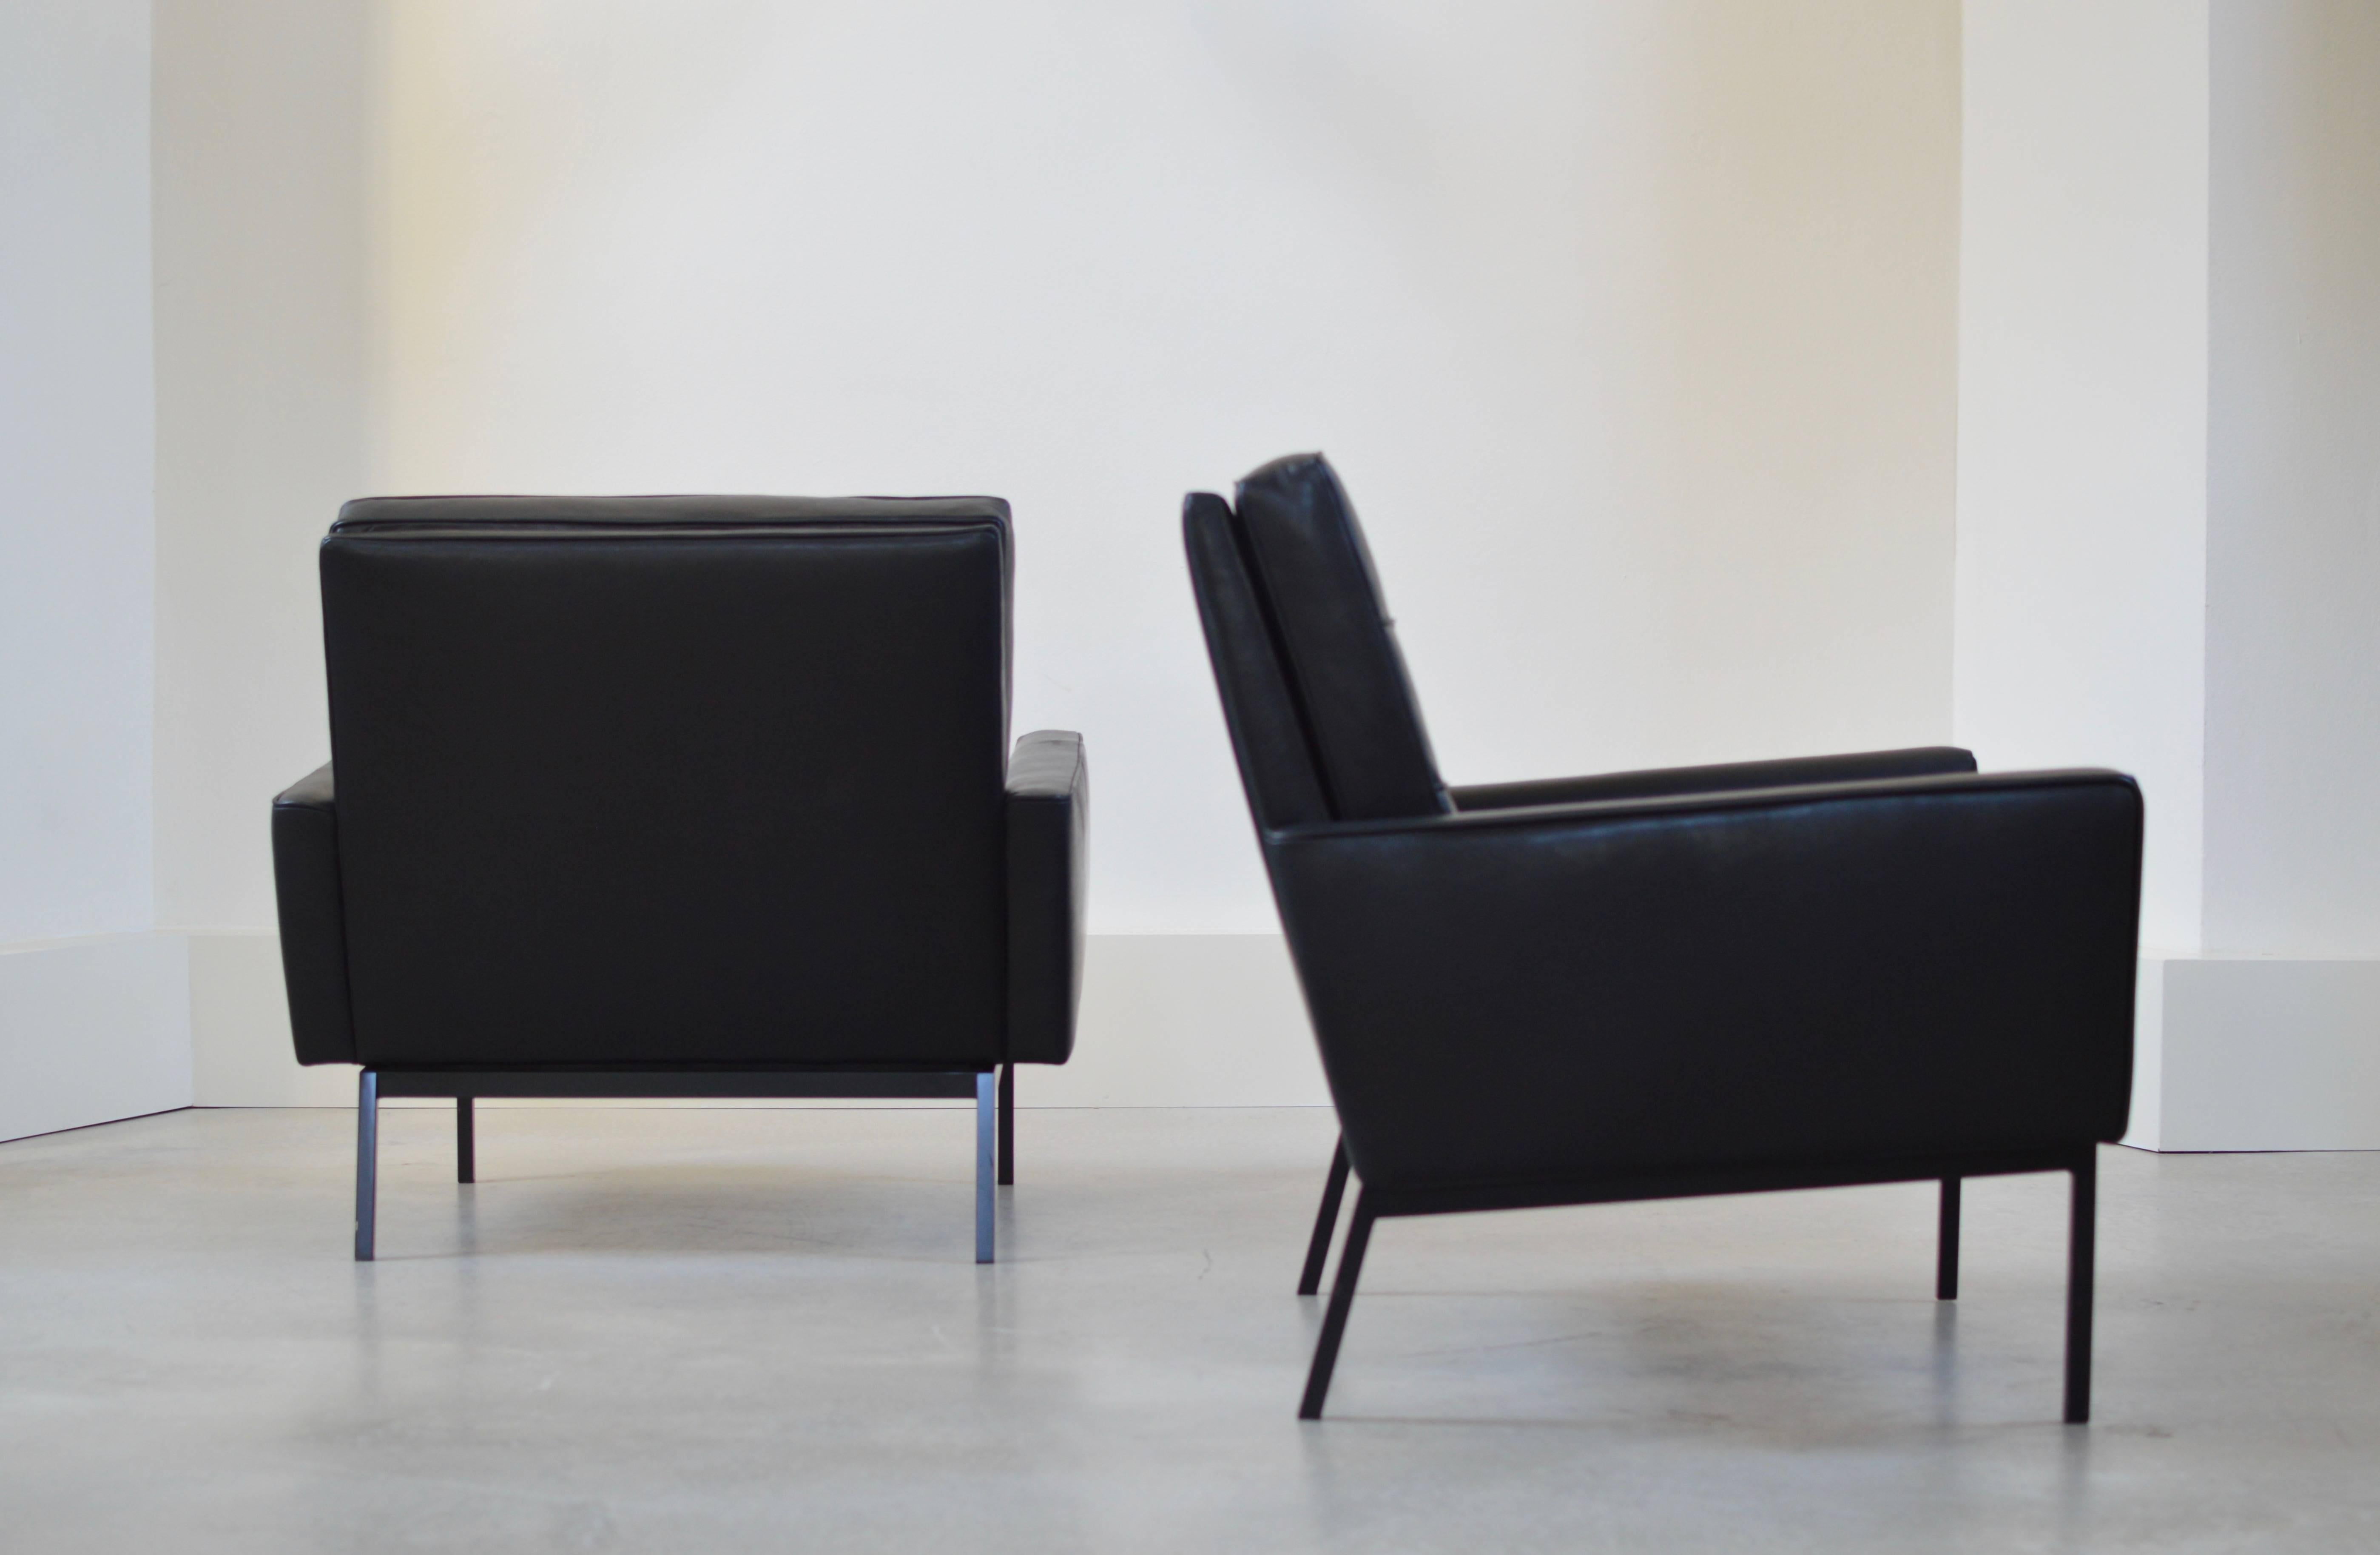 Pair of black leather Florence Knoll model 65A arm chairs with rare original black bases. Designed by Florence Knoll in 1958, discontinued in 1975. Seats are executed with inner springs which make these chairs highly comfortable. 
Chairs have been